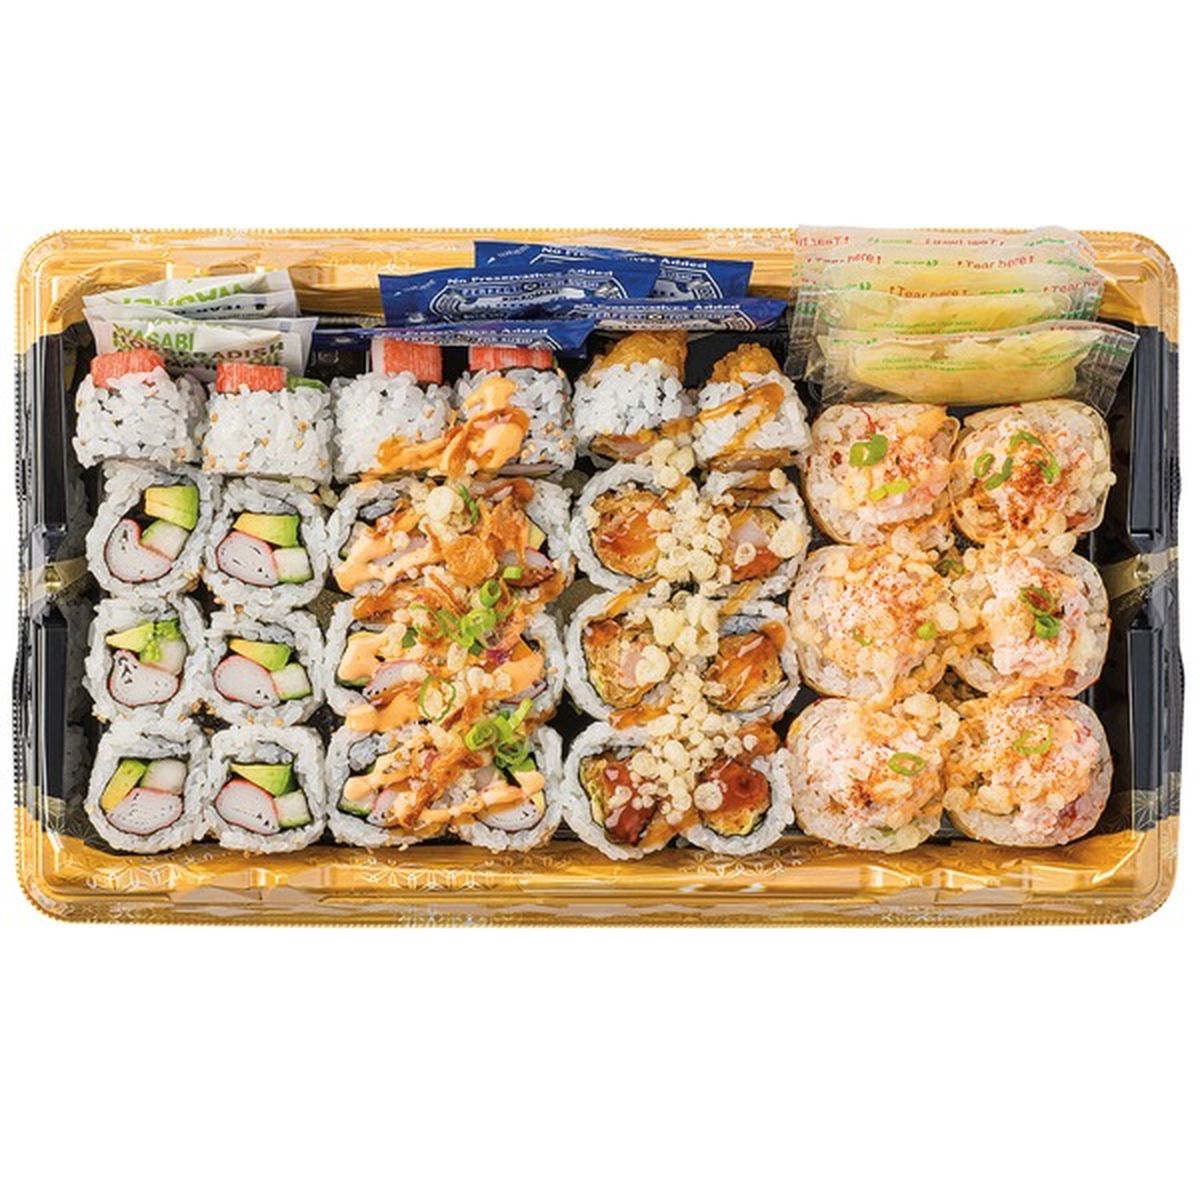 Calories in Wegmans Crunchy Roll, FAMILY PACK (Cooked)